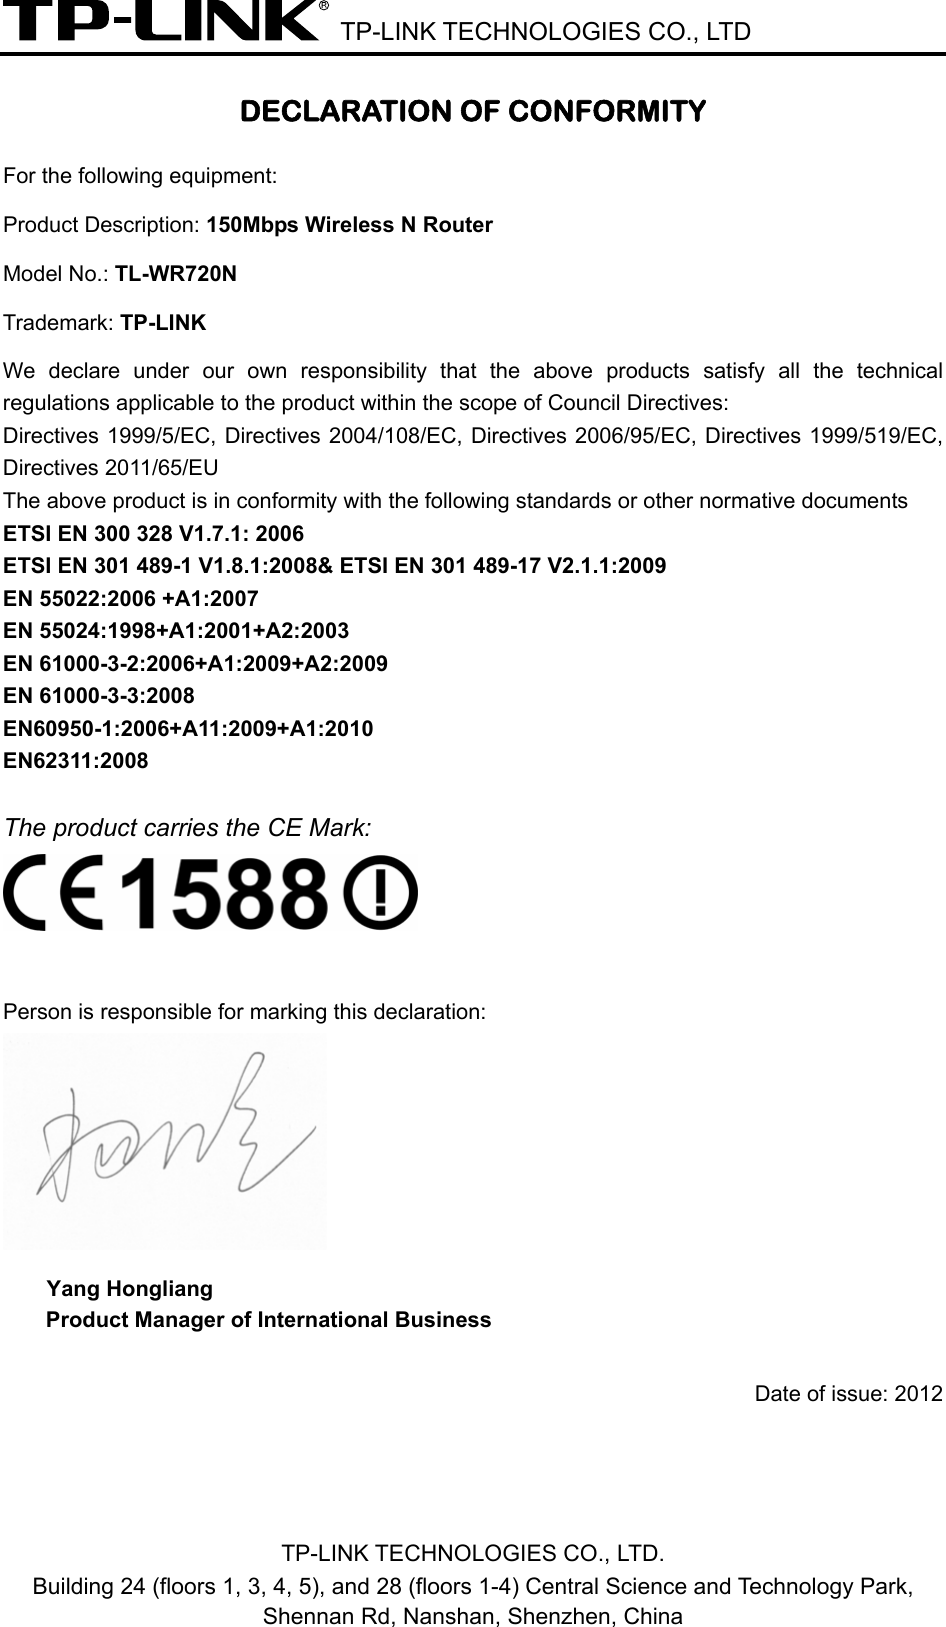  TP-LINK TECHNOLOGIES CO., LTD DECLARATION OF CONFORMITY For the following equipment: Product Description: 150Mbps Wireless N Router Model No.: TL-WR720N Trademark: TP-LINK    We declare under our own responsibility that the above products satisfy all the technical regulations applicable to the product within the scope of Council Directives:     Directives 1999/5/EC, Directives 2004/108/EC, Directives 2006/95/EC, Directives 1999/519/EC, Directives 2011/65/EU The above product is in conformity with the following standards or other normative documents ETSI EN 300 328 V1.7.1: 2006 ETSI EN 301 489-1 V1.8.1:2008&amp; ETSI EN 301 489-17 V2.1.1:2009 EN 55022:2006 +A1:2007 EN 55024:1998+A1:2001+A2:2003 EN 61000-3-2:2006+A1:2009+A2:2009 EN 61000-3-3:2008 EN60950-1:2006+A11:2009+A1:2010 EN62311:2008  The product carries the CE Mark:   Person is responsible for marking this declaration:  Yang Hongliang Product Manager of International Business    Date of issue: 2012TP-LINK TECHNOLOGIES CO., LTD. Building 24 (floors 1, 3, 4, 5), and 28 (floors 1-4) Central Science and Technology Park, Shennan Rd, Nanshan, Shenzhen, China 